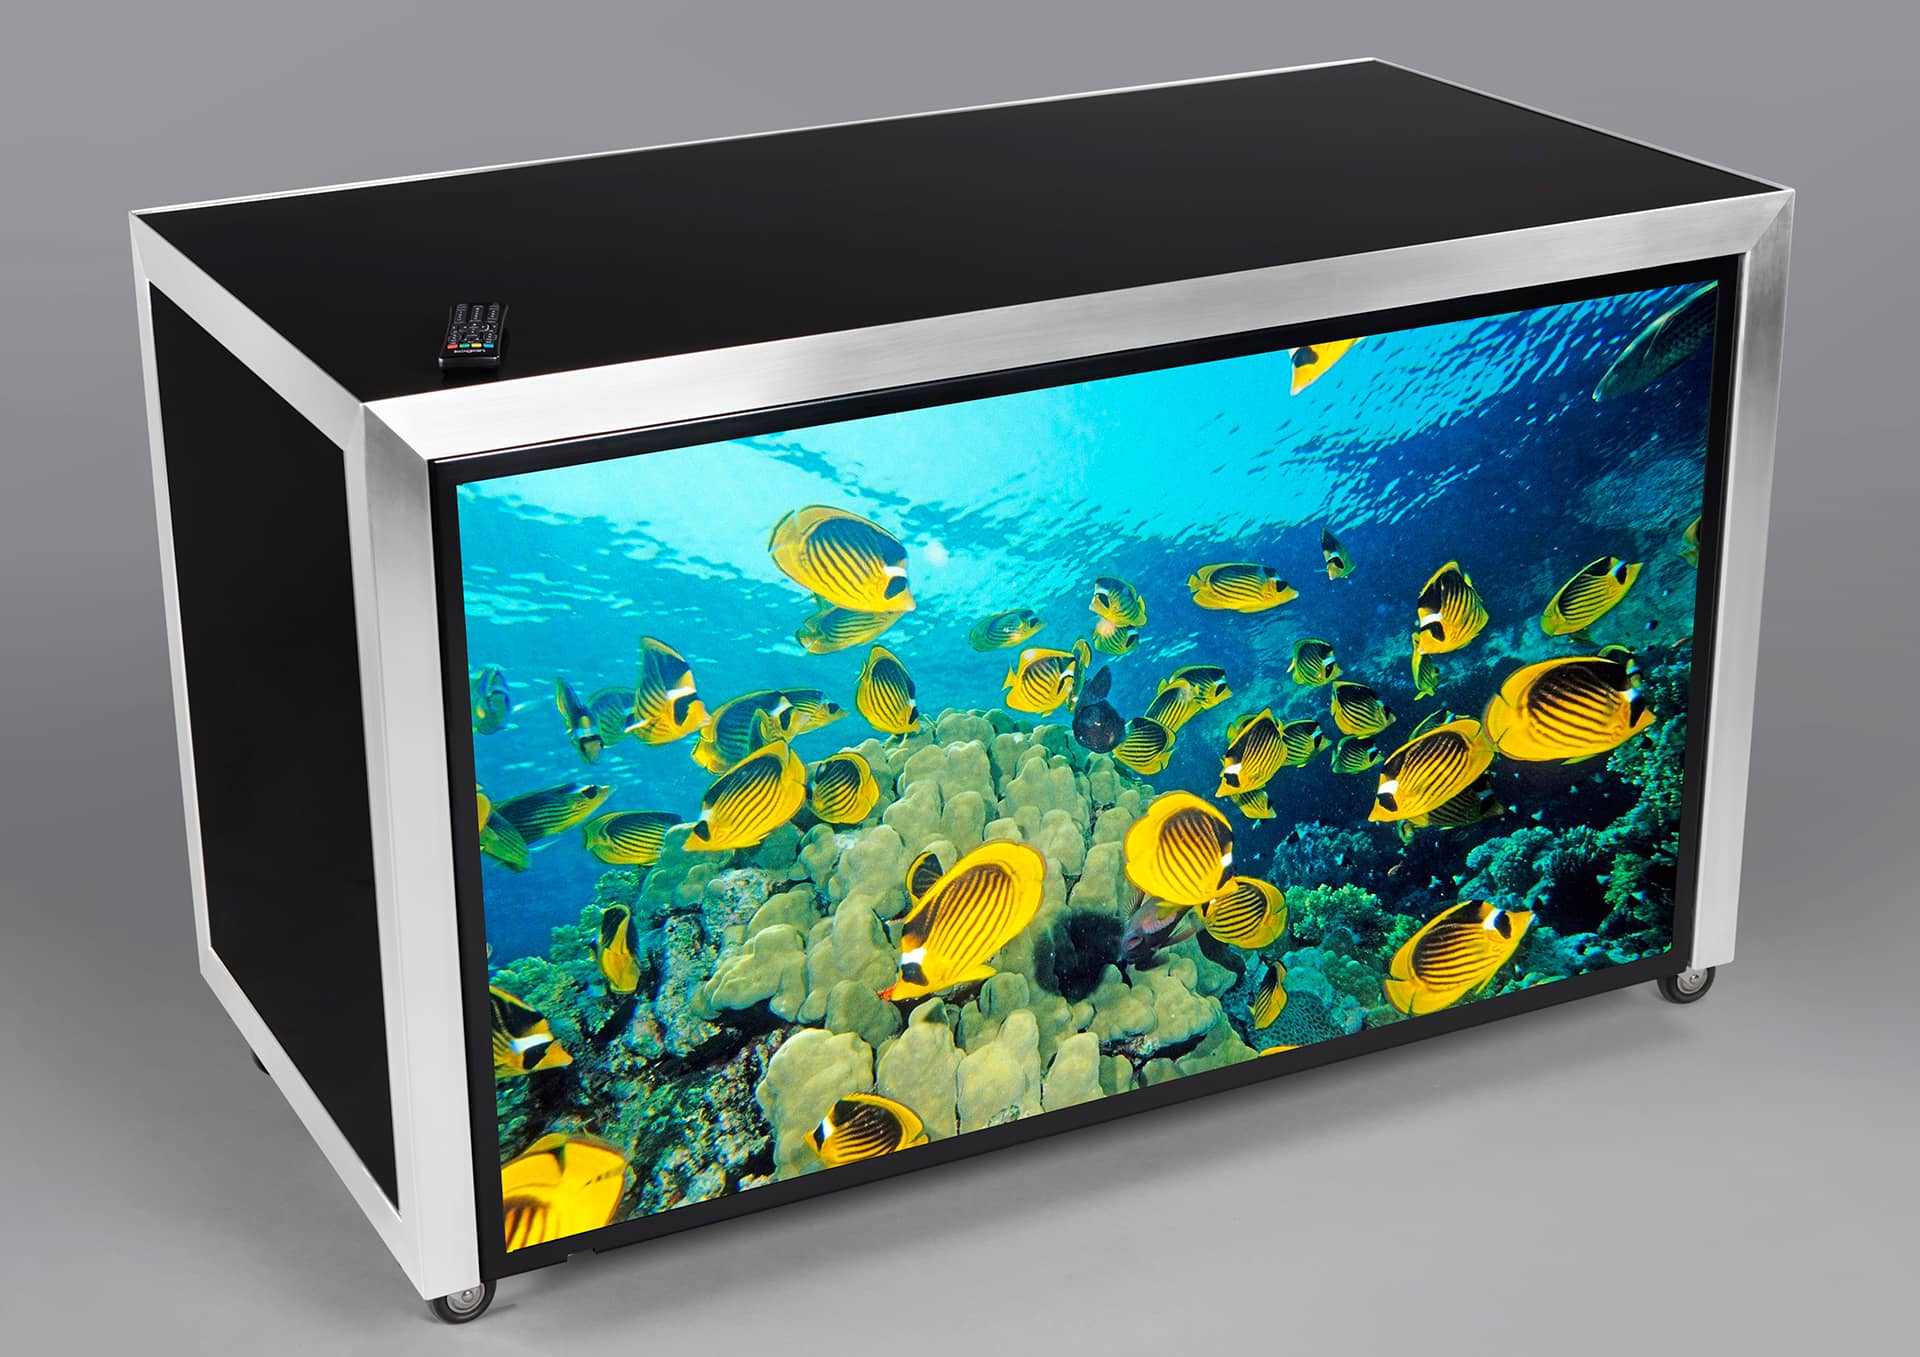 Image of media screen - digital touch screen modular table for venues and events from IHS Design - global designer and manufacturer of high-performing hospitality equipment and furnishings.